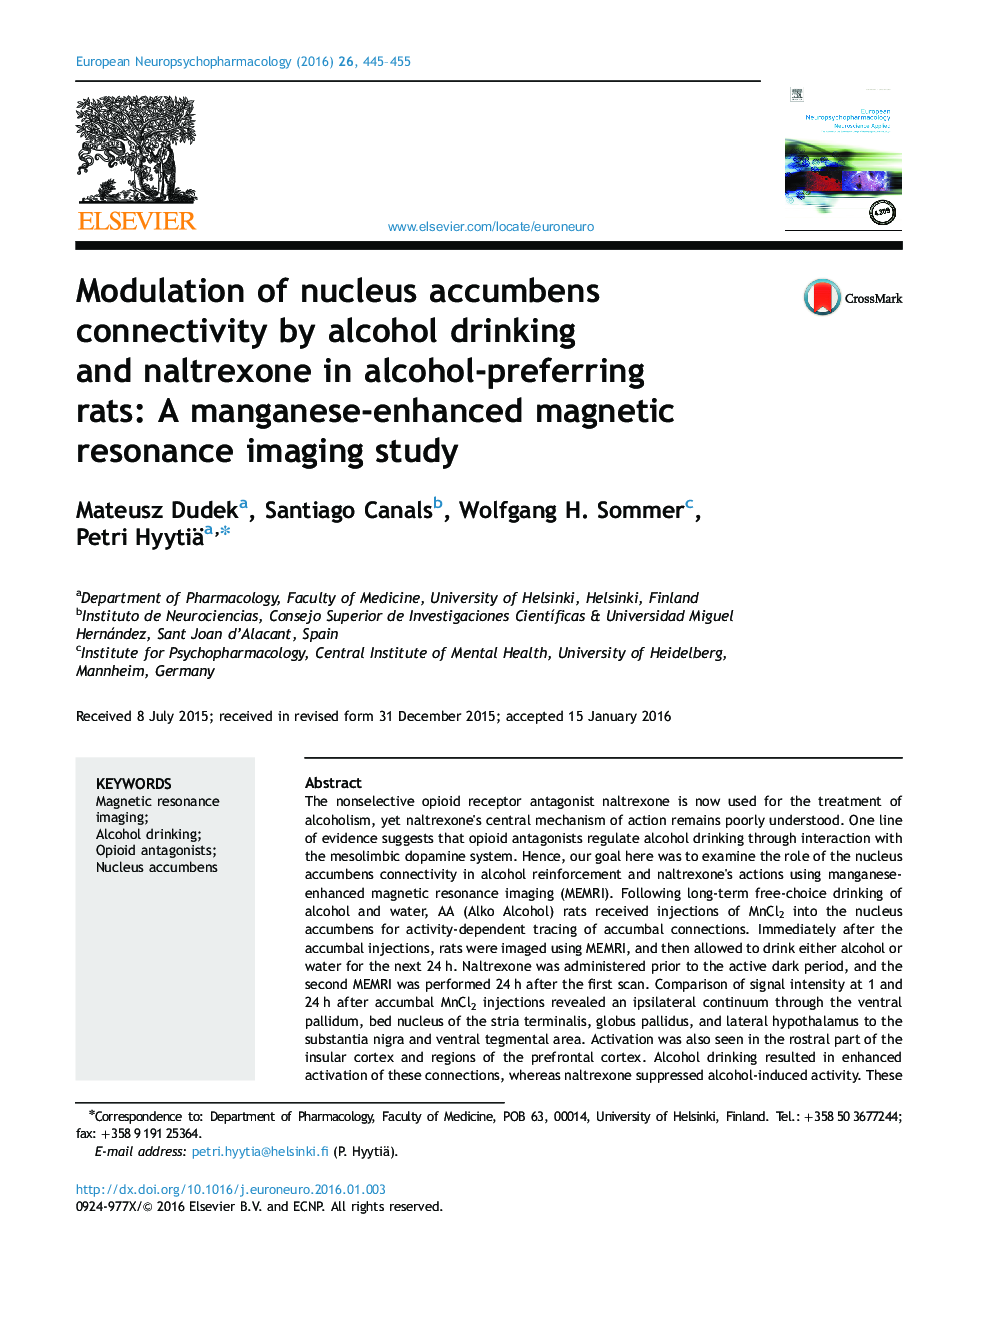 Modulation of nucleus accumbens connectivity by alcohol drinking and naltrexone in alcohol-preferring rats: A manganese-enhanced magnetic resonance imaging study